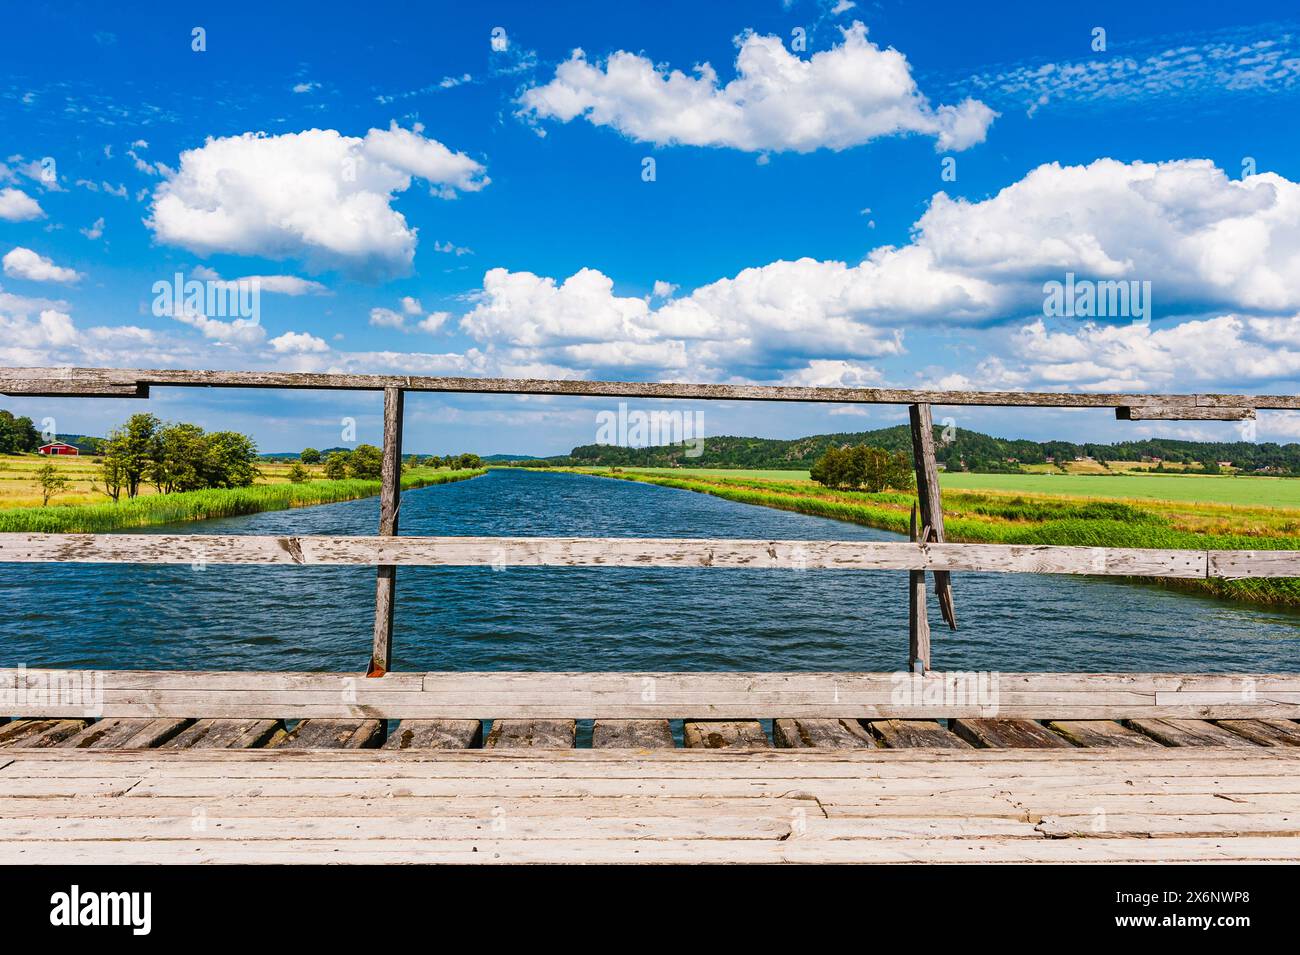 A rustic wooden bridge spans a calm river under a bright blue sky scattered with fluffy white clouds. Verdant fields and trees surround the water, cre Stock Photo